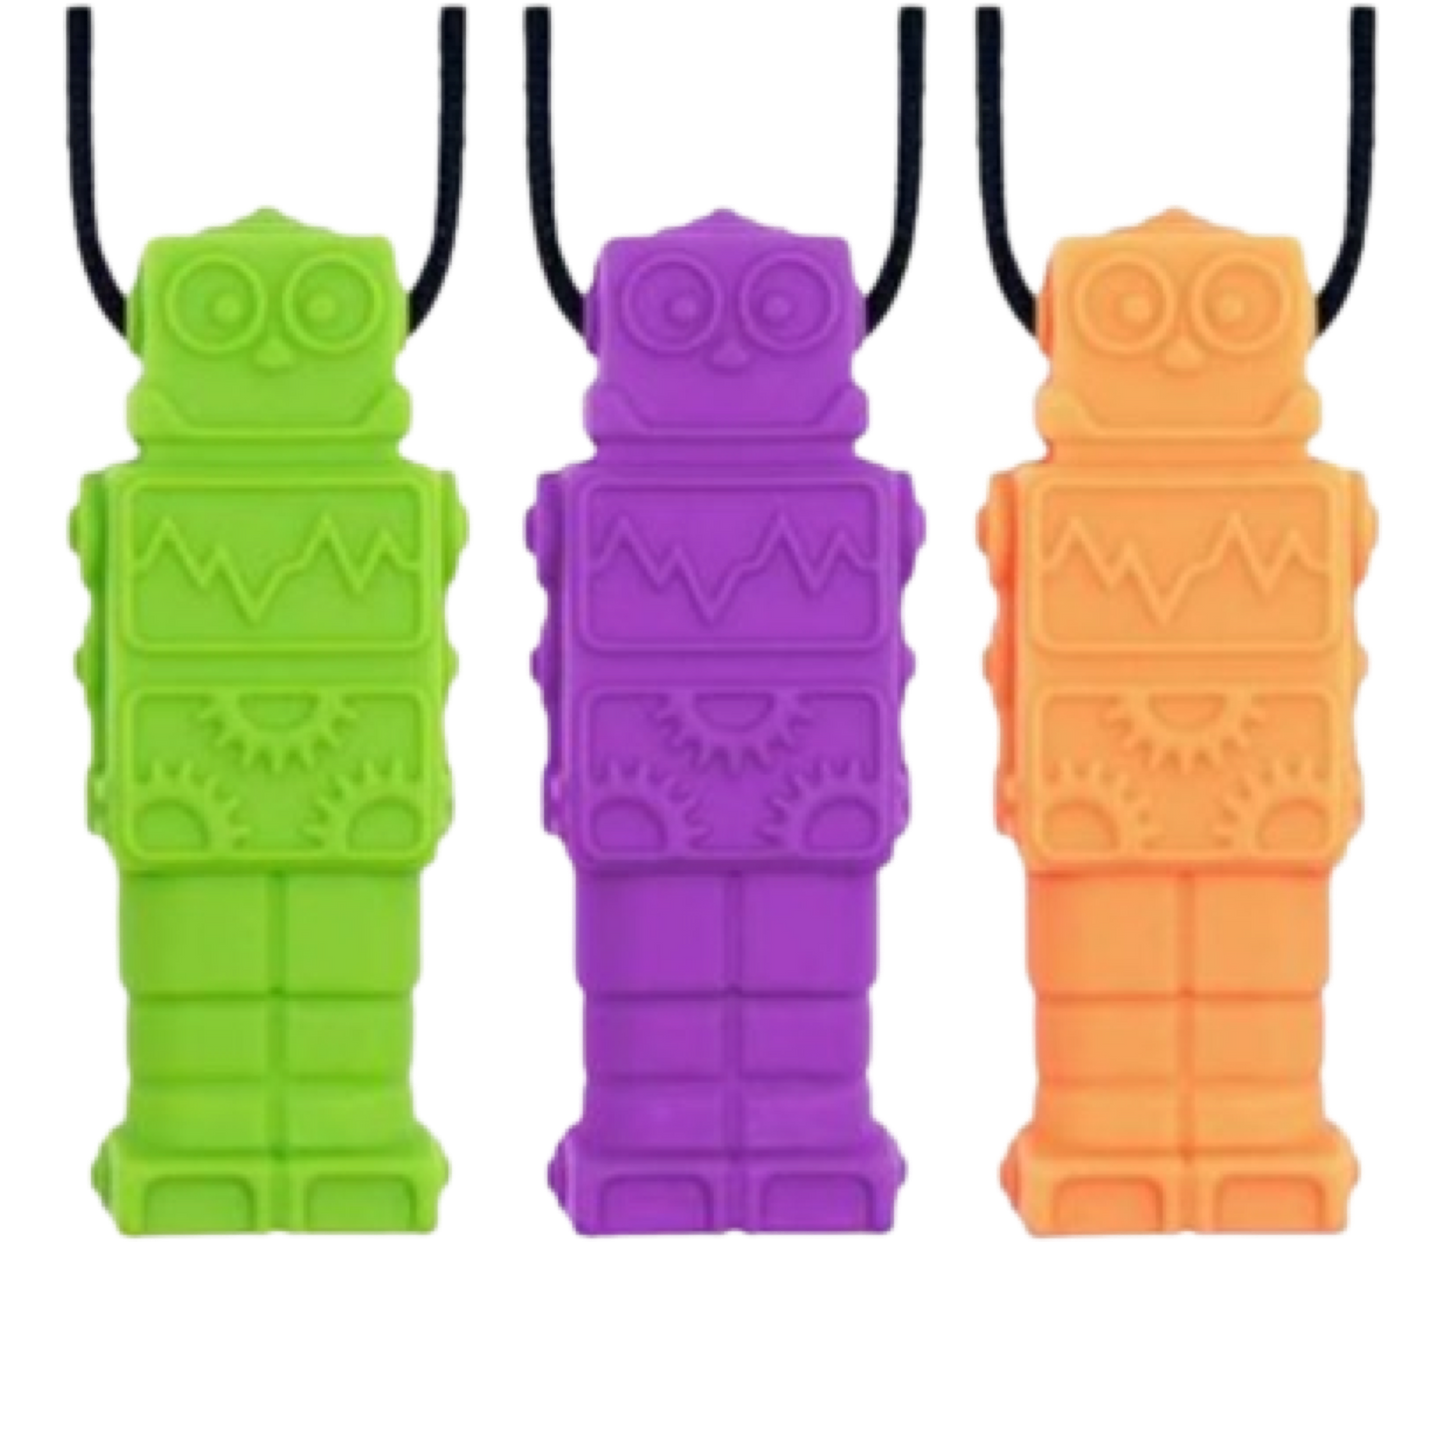 3-Pack Chewable Robot Necklace